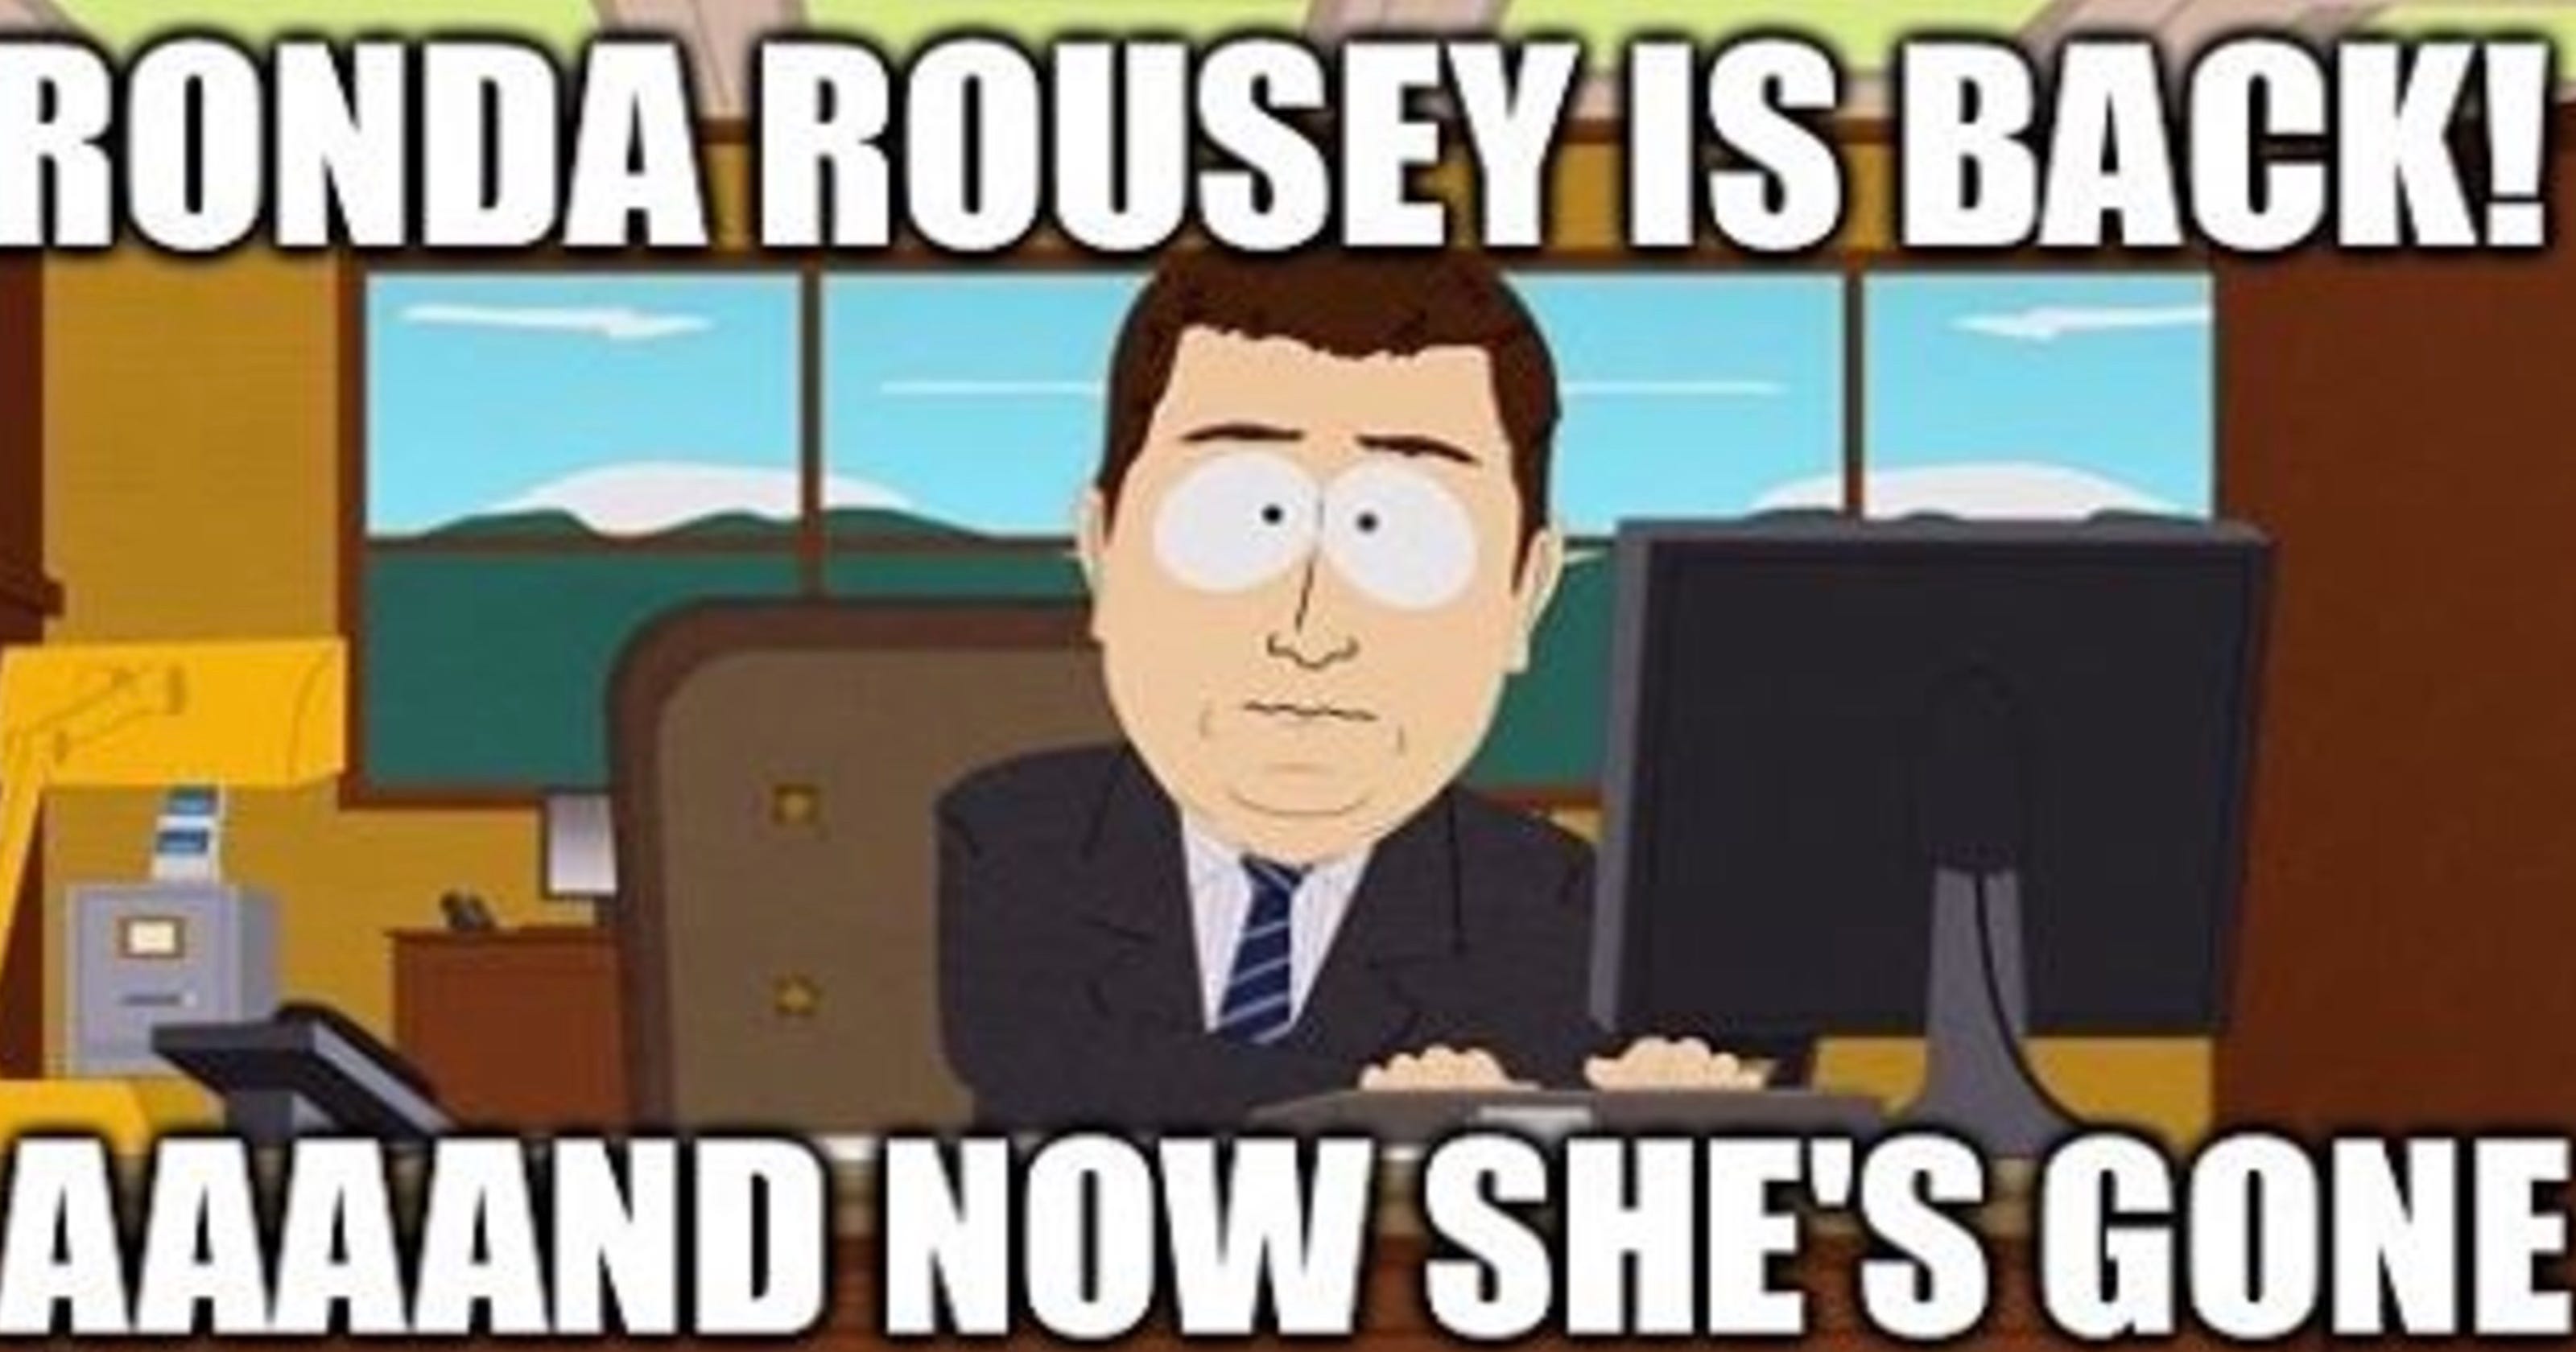 The 15 Funniest Memes From Ronda Rouseys Loss